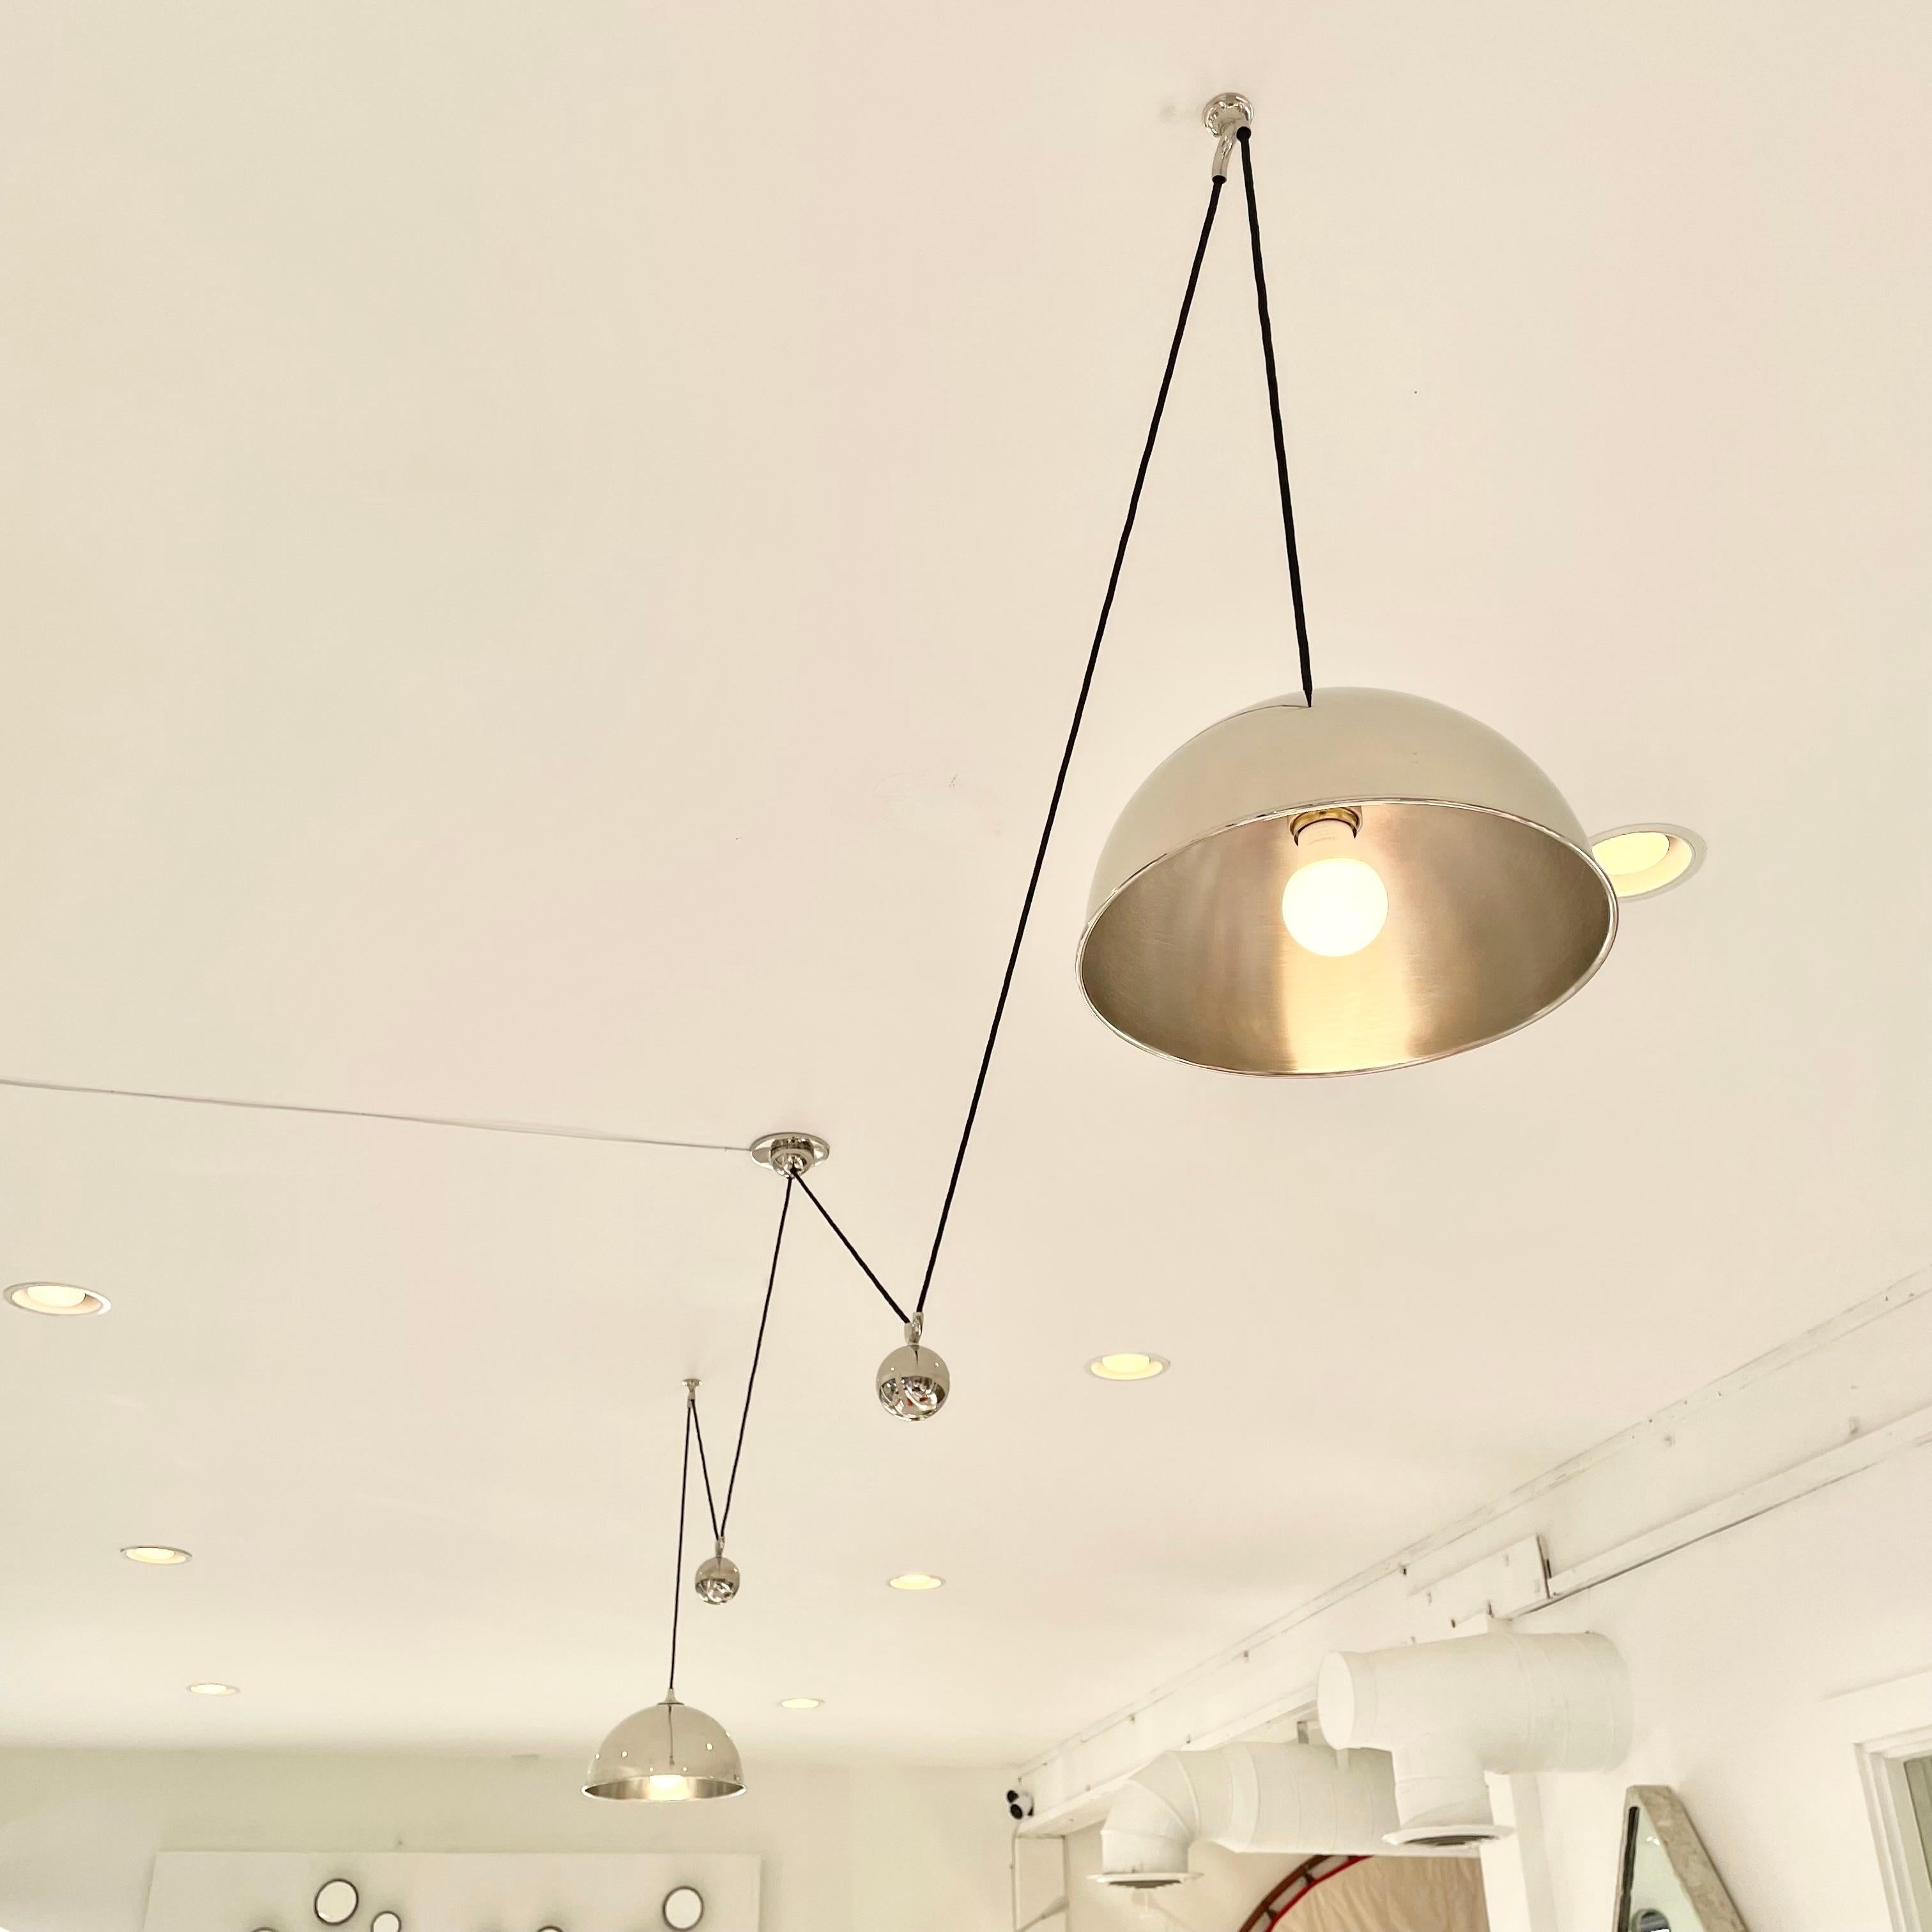 Architectural nickel counter balance chandelier by Florian Schulz. Two pendants hang on both sides of a center canopy. Nickel counter weights, canopy and hardware. Pendants are height adjustable simply by pulling down or pushing up on each light.